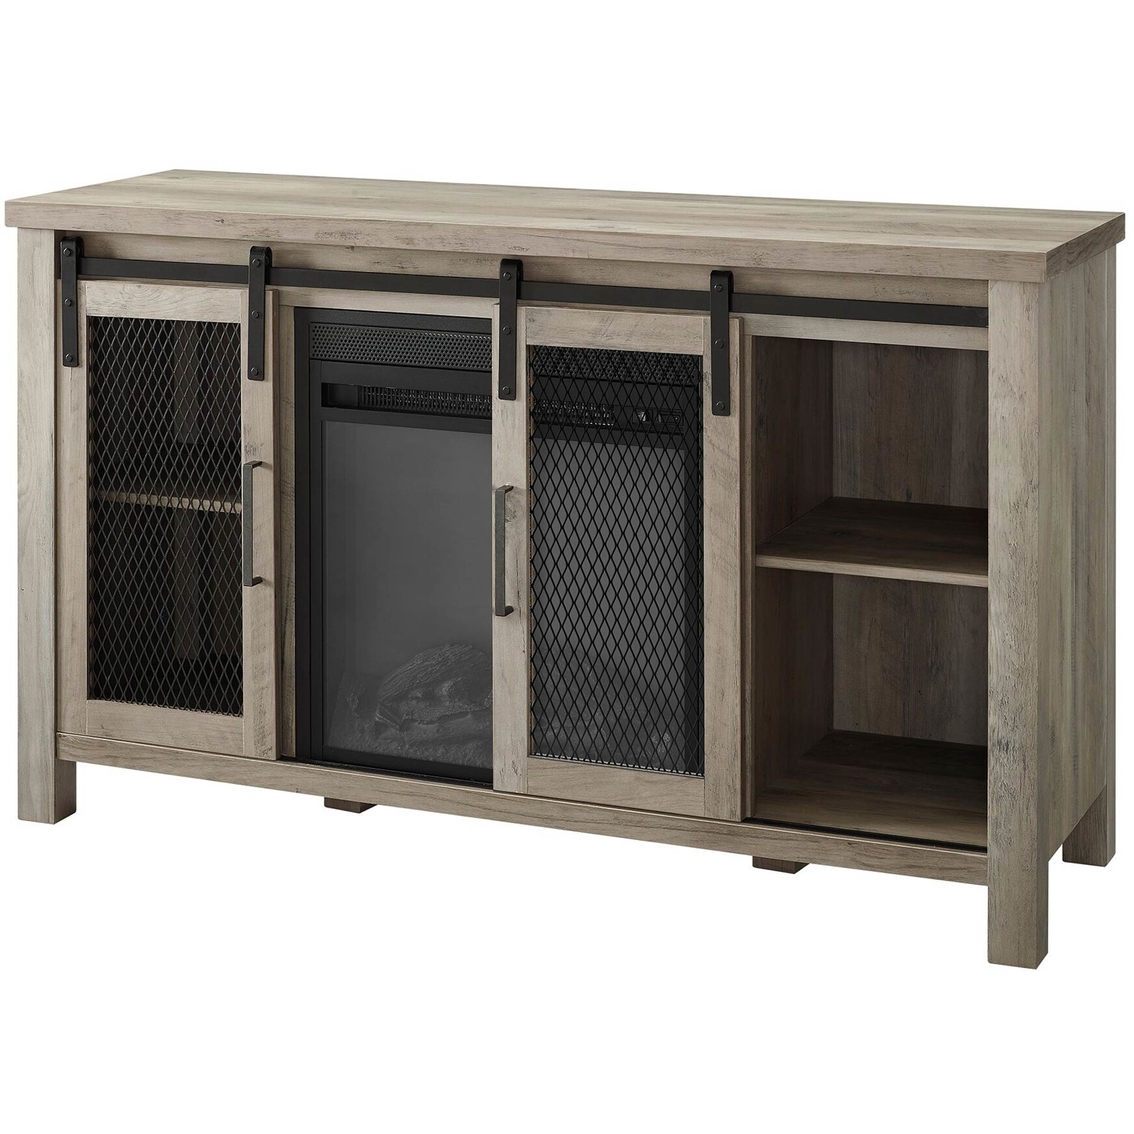 Walker Edison 48 in. Rustic Farmhouse Fireplace TV Stand with Sliding Doors - Image 2 of 4